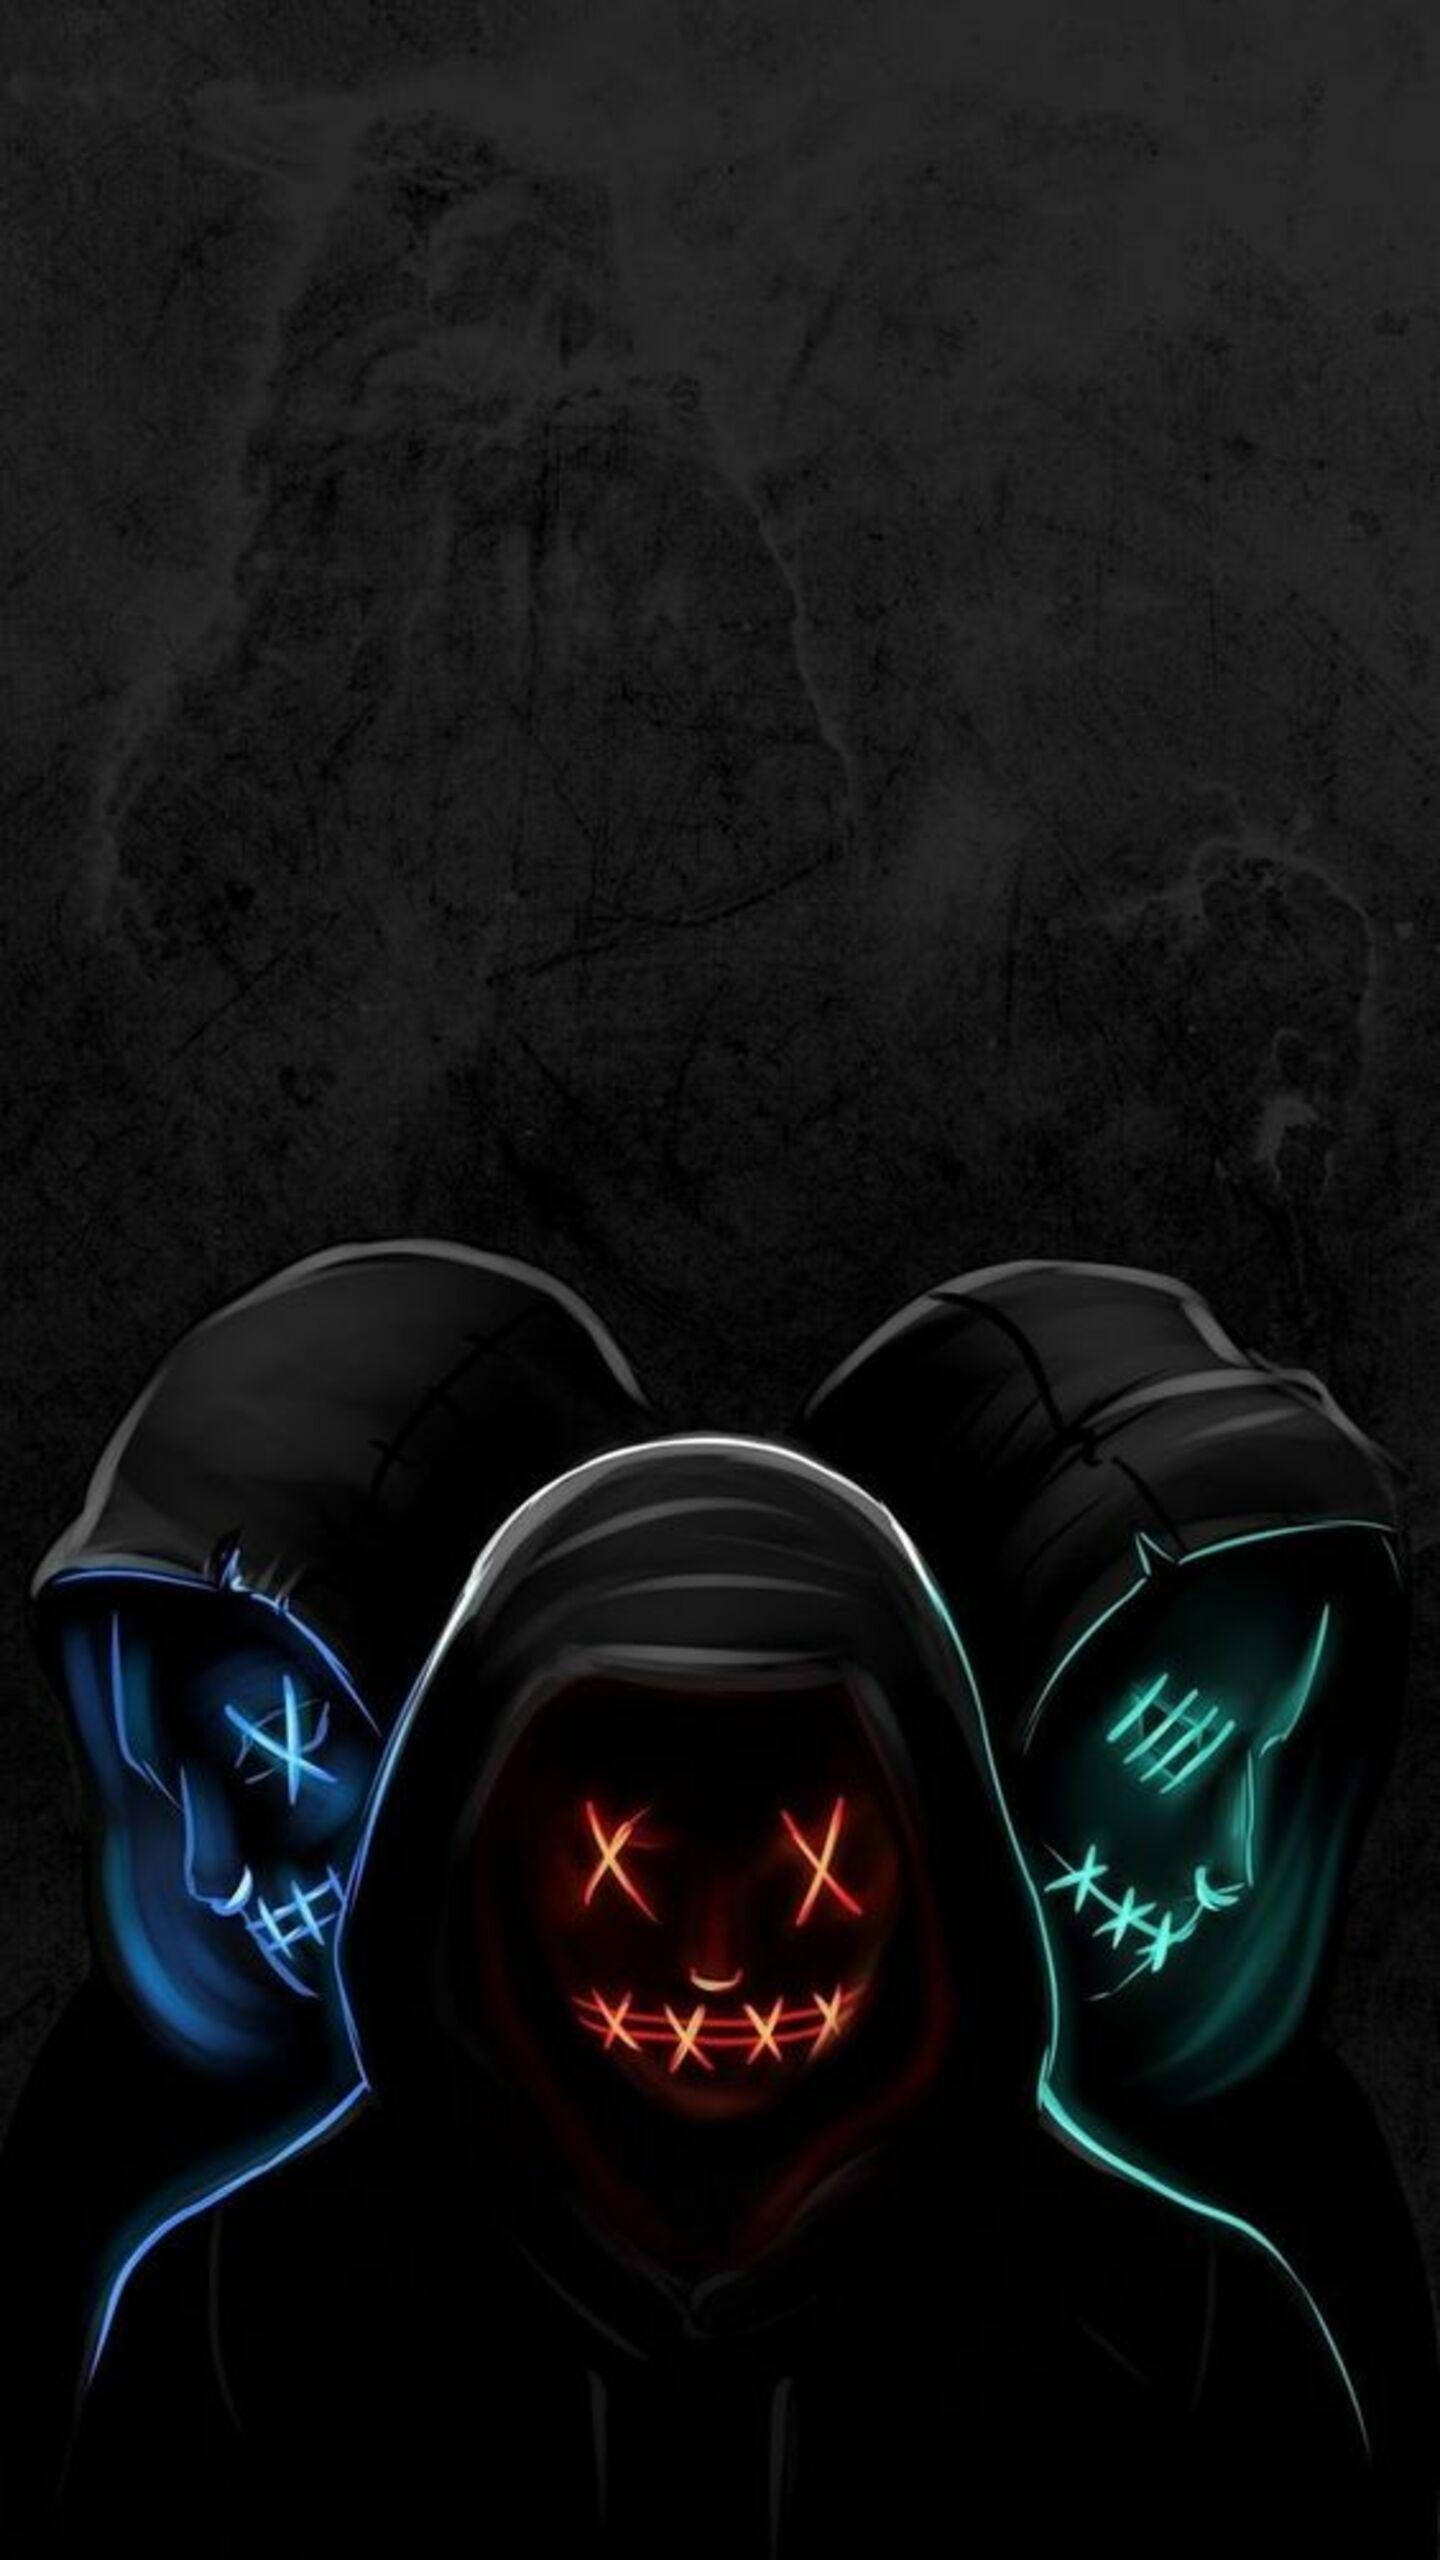 Led Purge Mask Wallpaper Hd For Android - Purge Wallpaper Hd - HD Wallpaper 